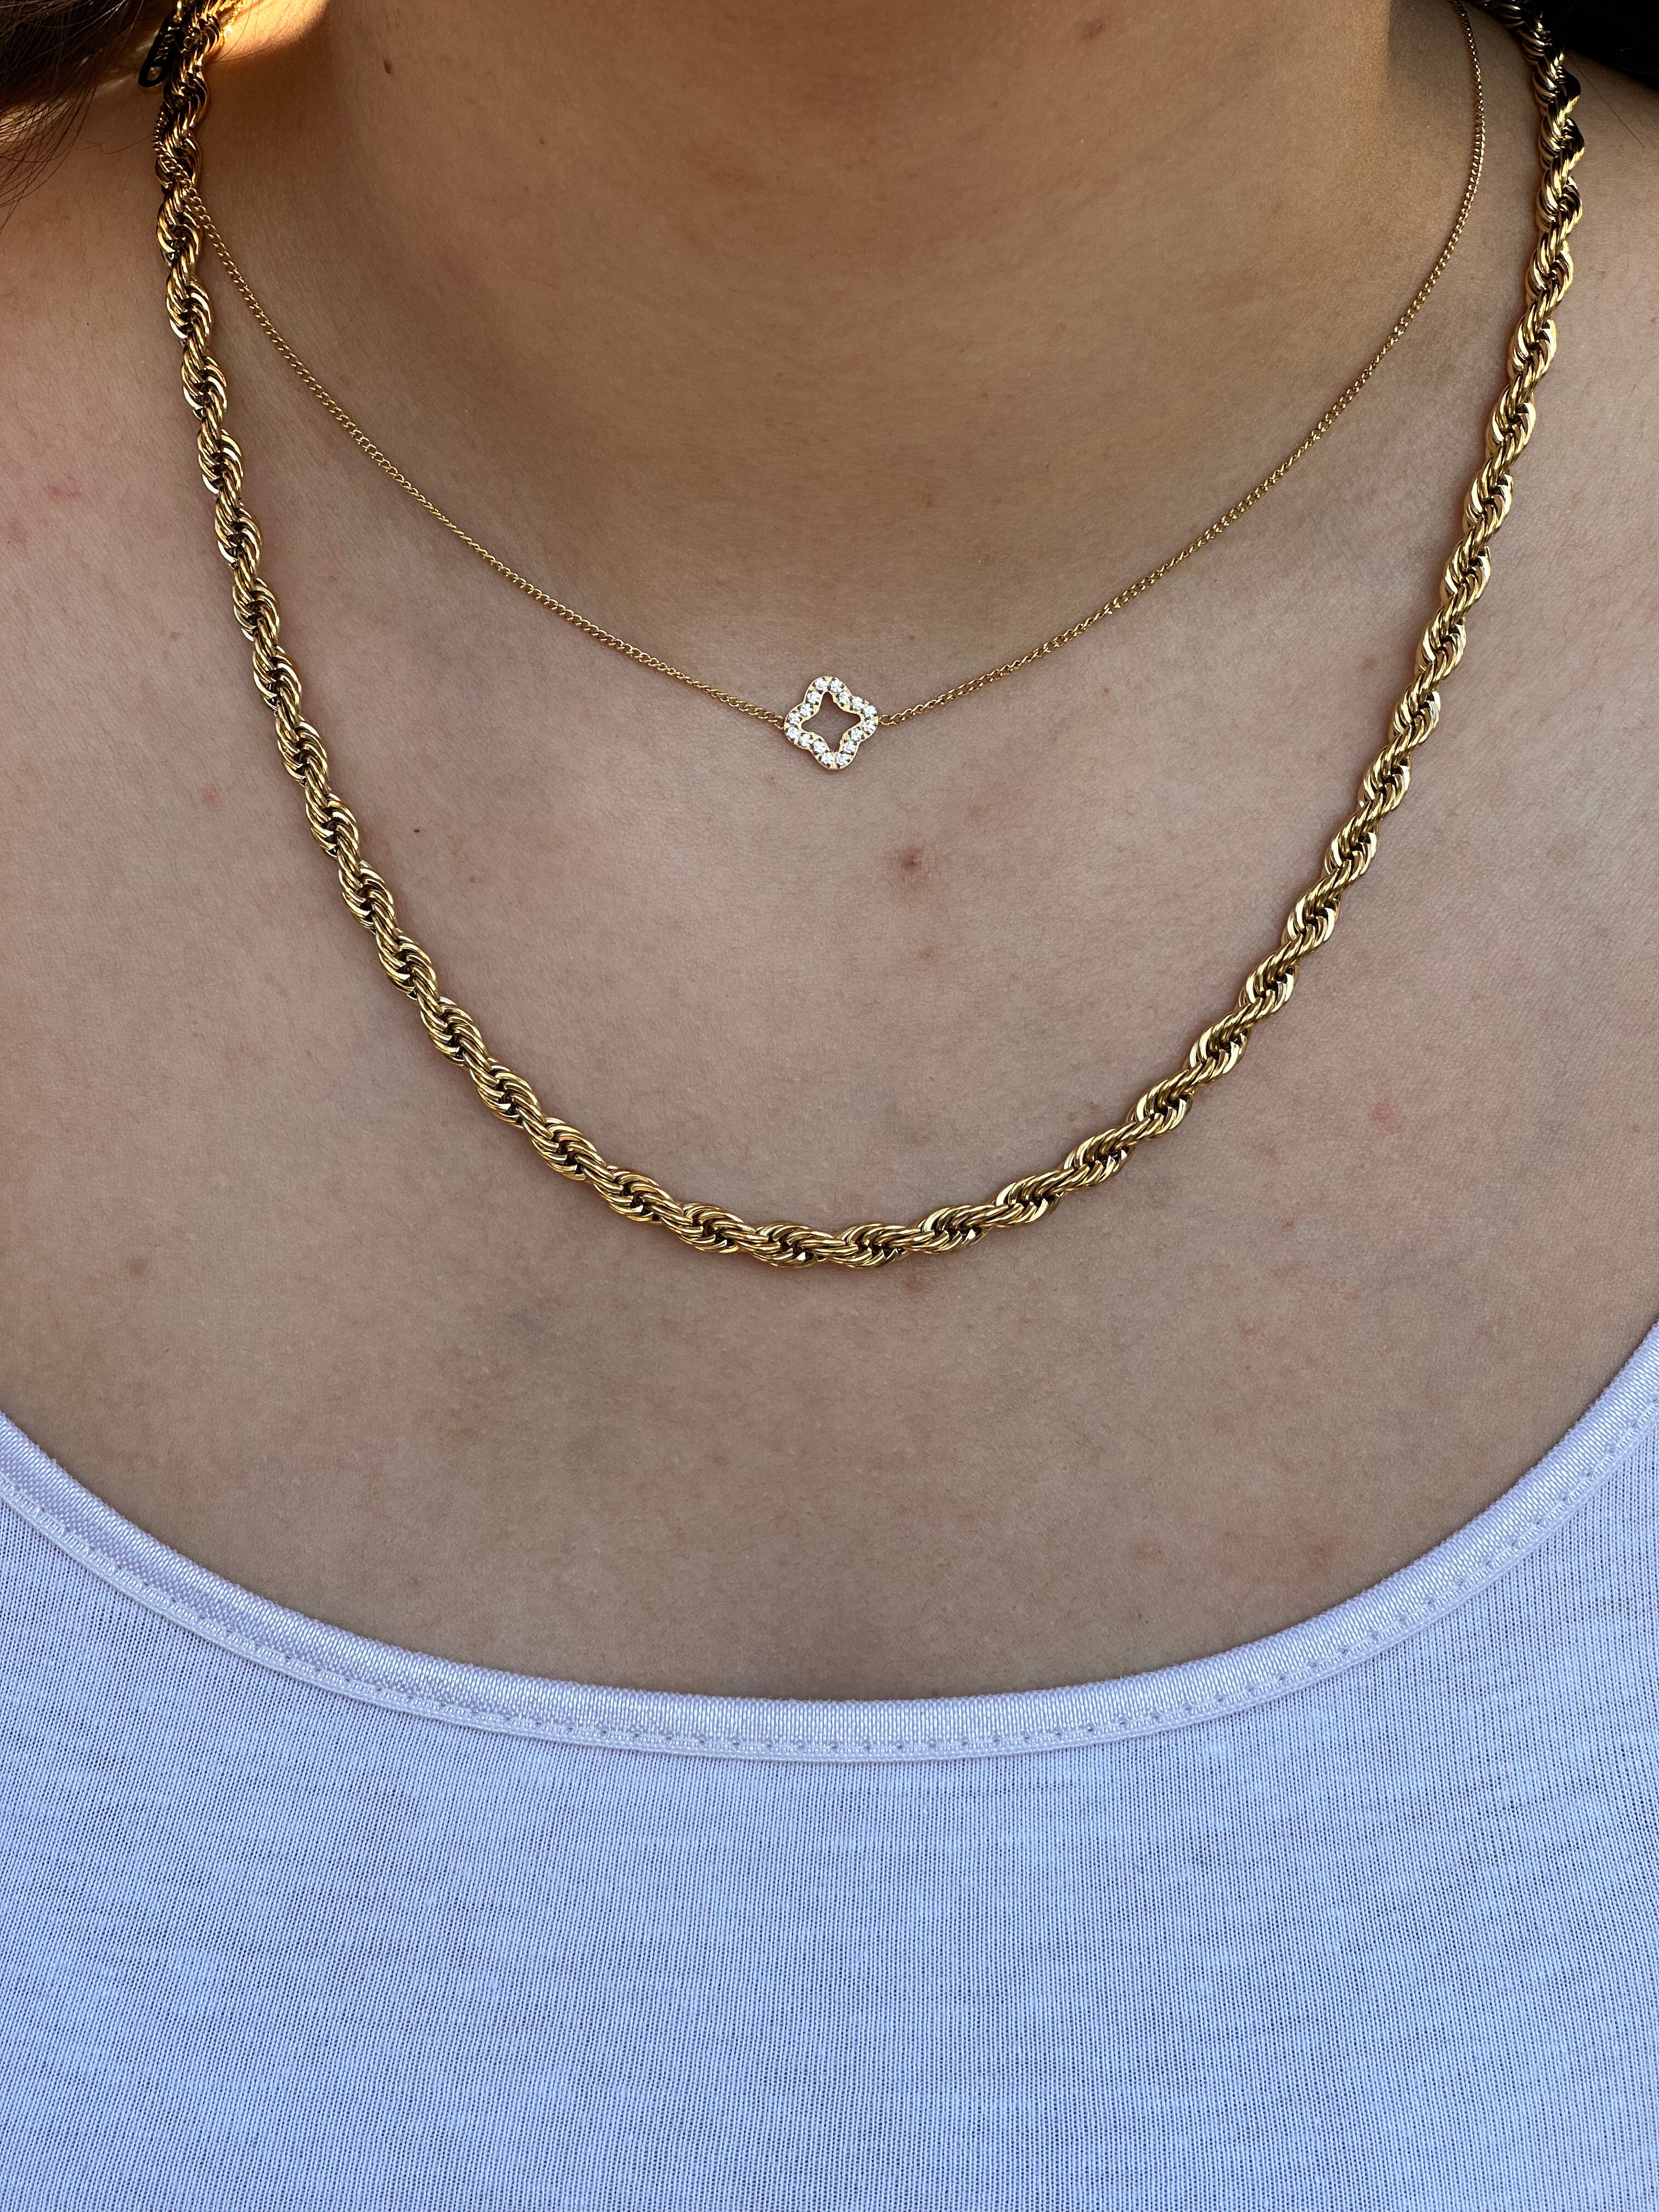 18k Gold Rope Chain Necklace